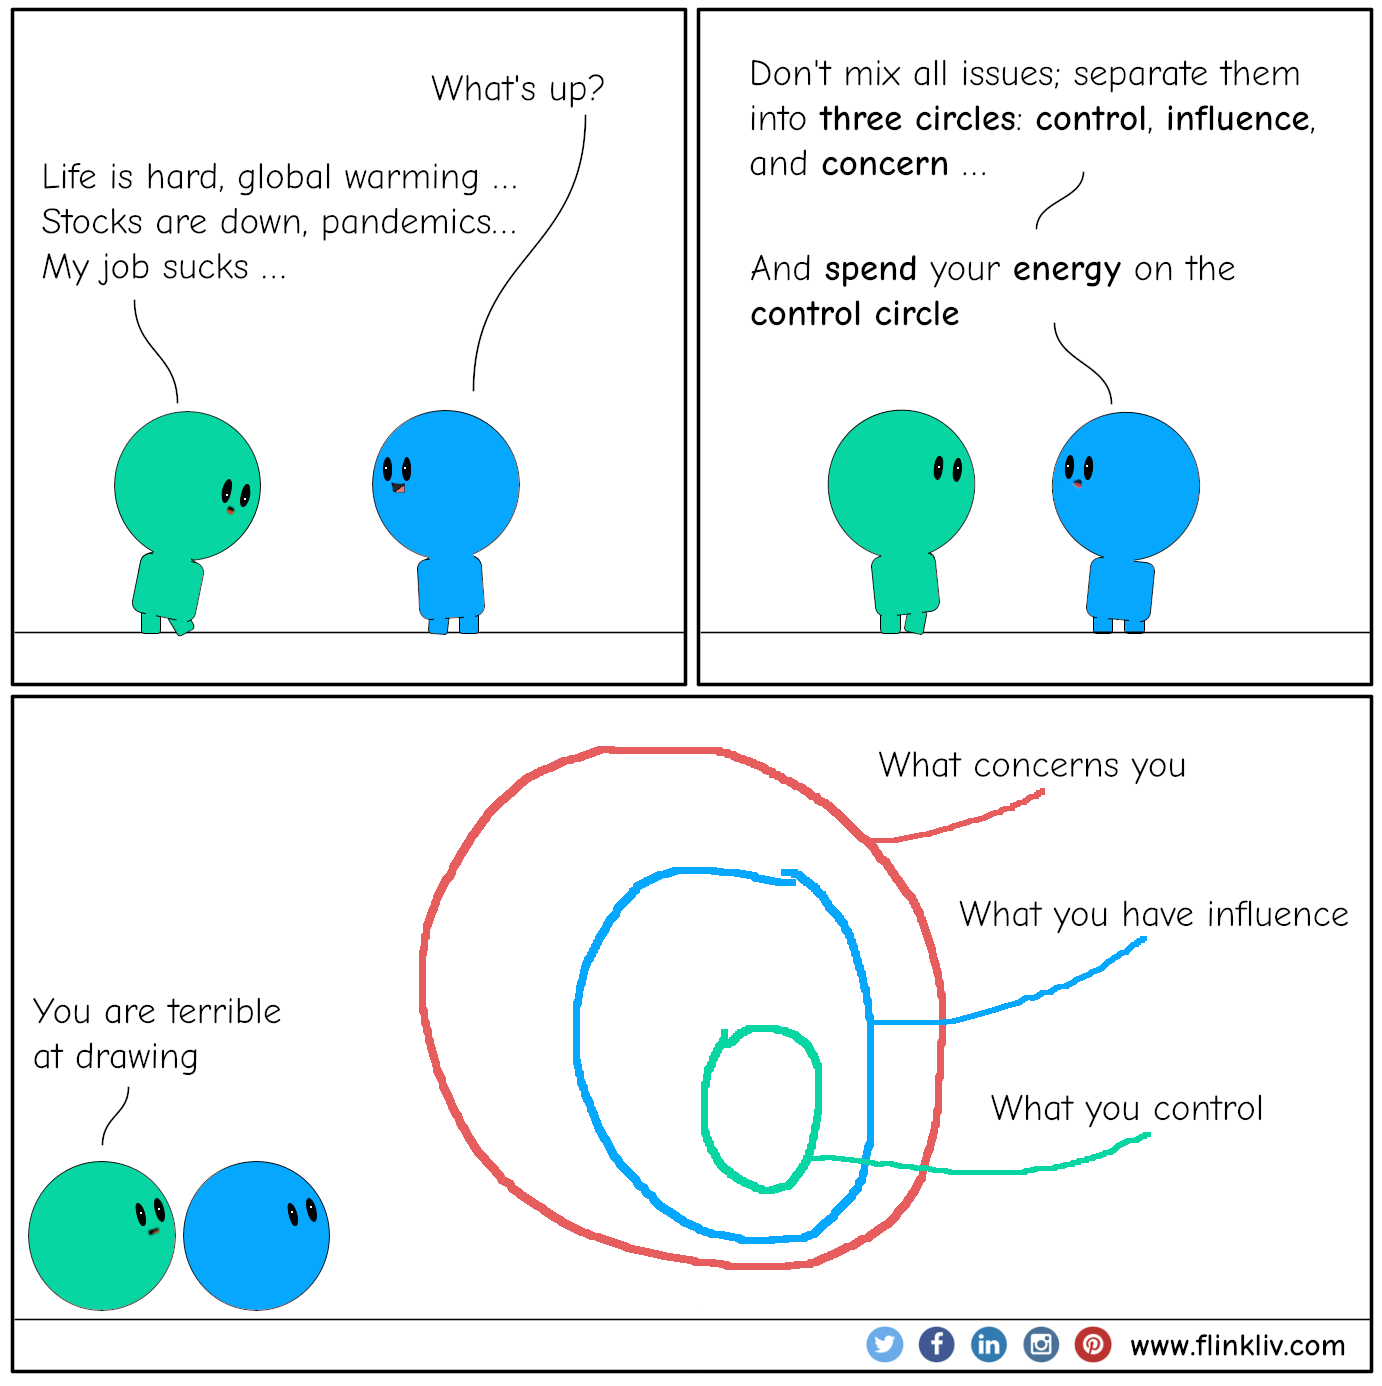 Conversation between A and B about the circle of influence. 
            B:What's up?
            A:Life is hard, global warming, stocks are down, pandemics, my job sucks
            B:Don't mix all issues; separate them into three circles: control, influence, and concern.
            B:And spend your energy on the control circle.
            A:You are terrible at drawing
            
            
              